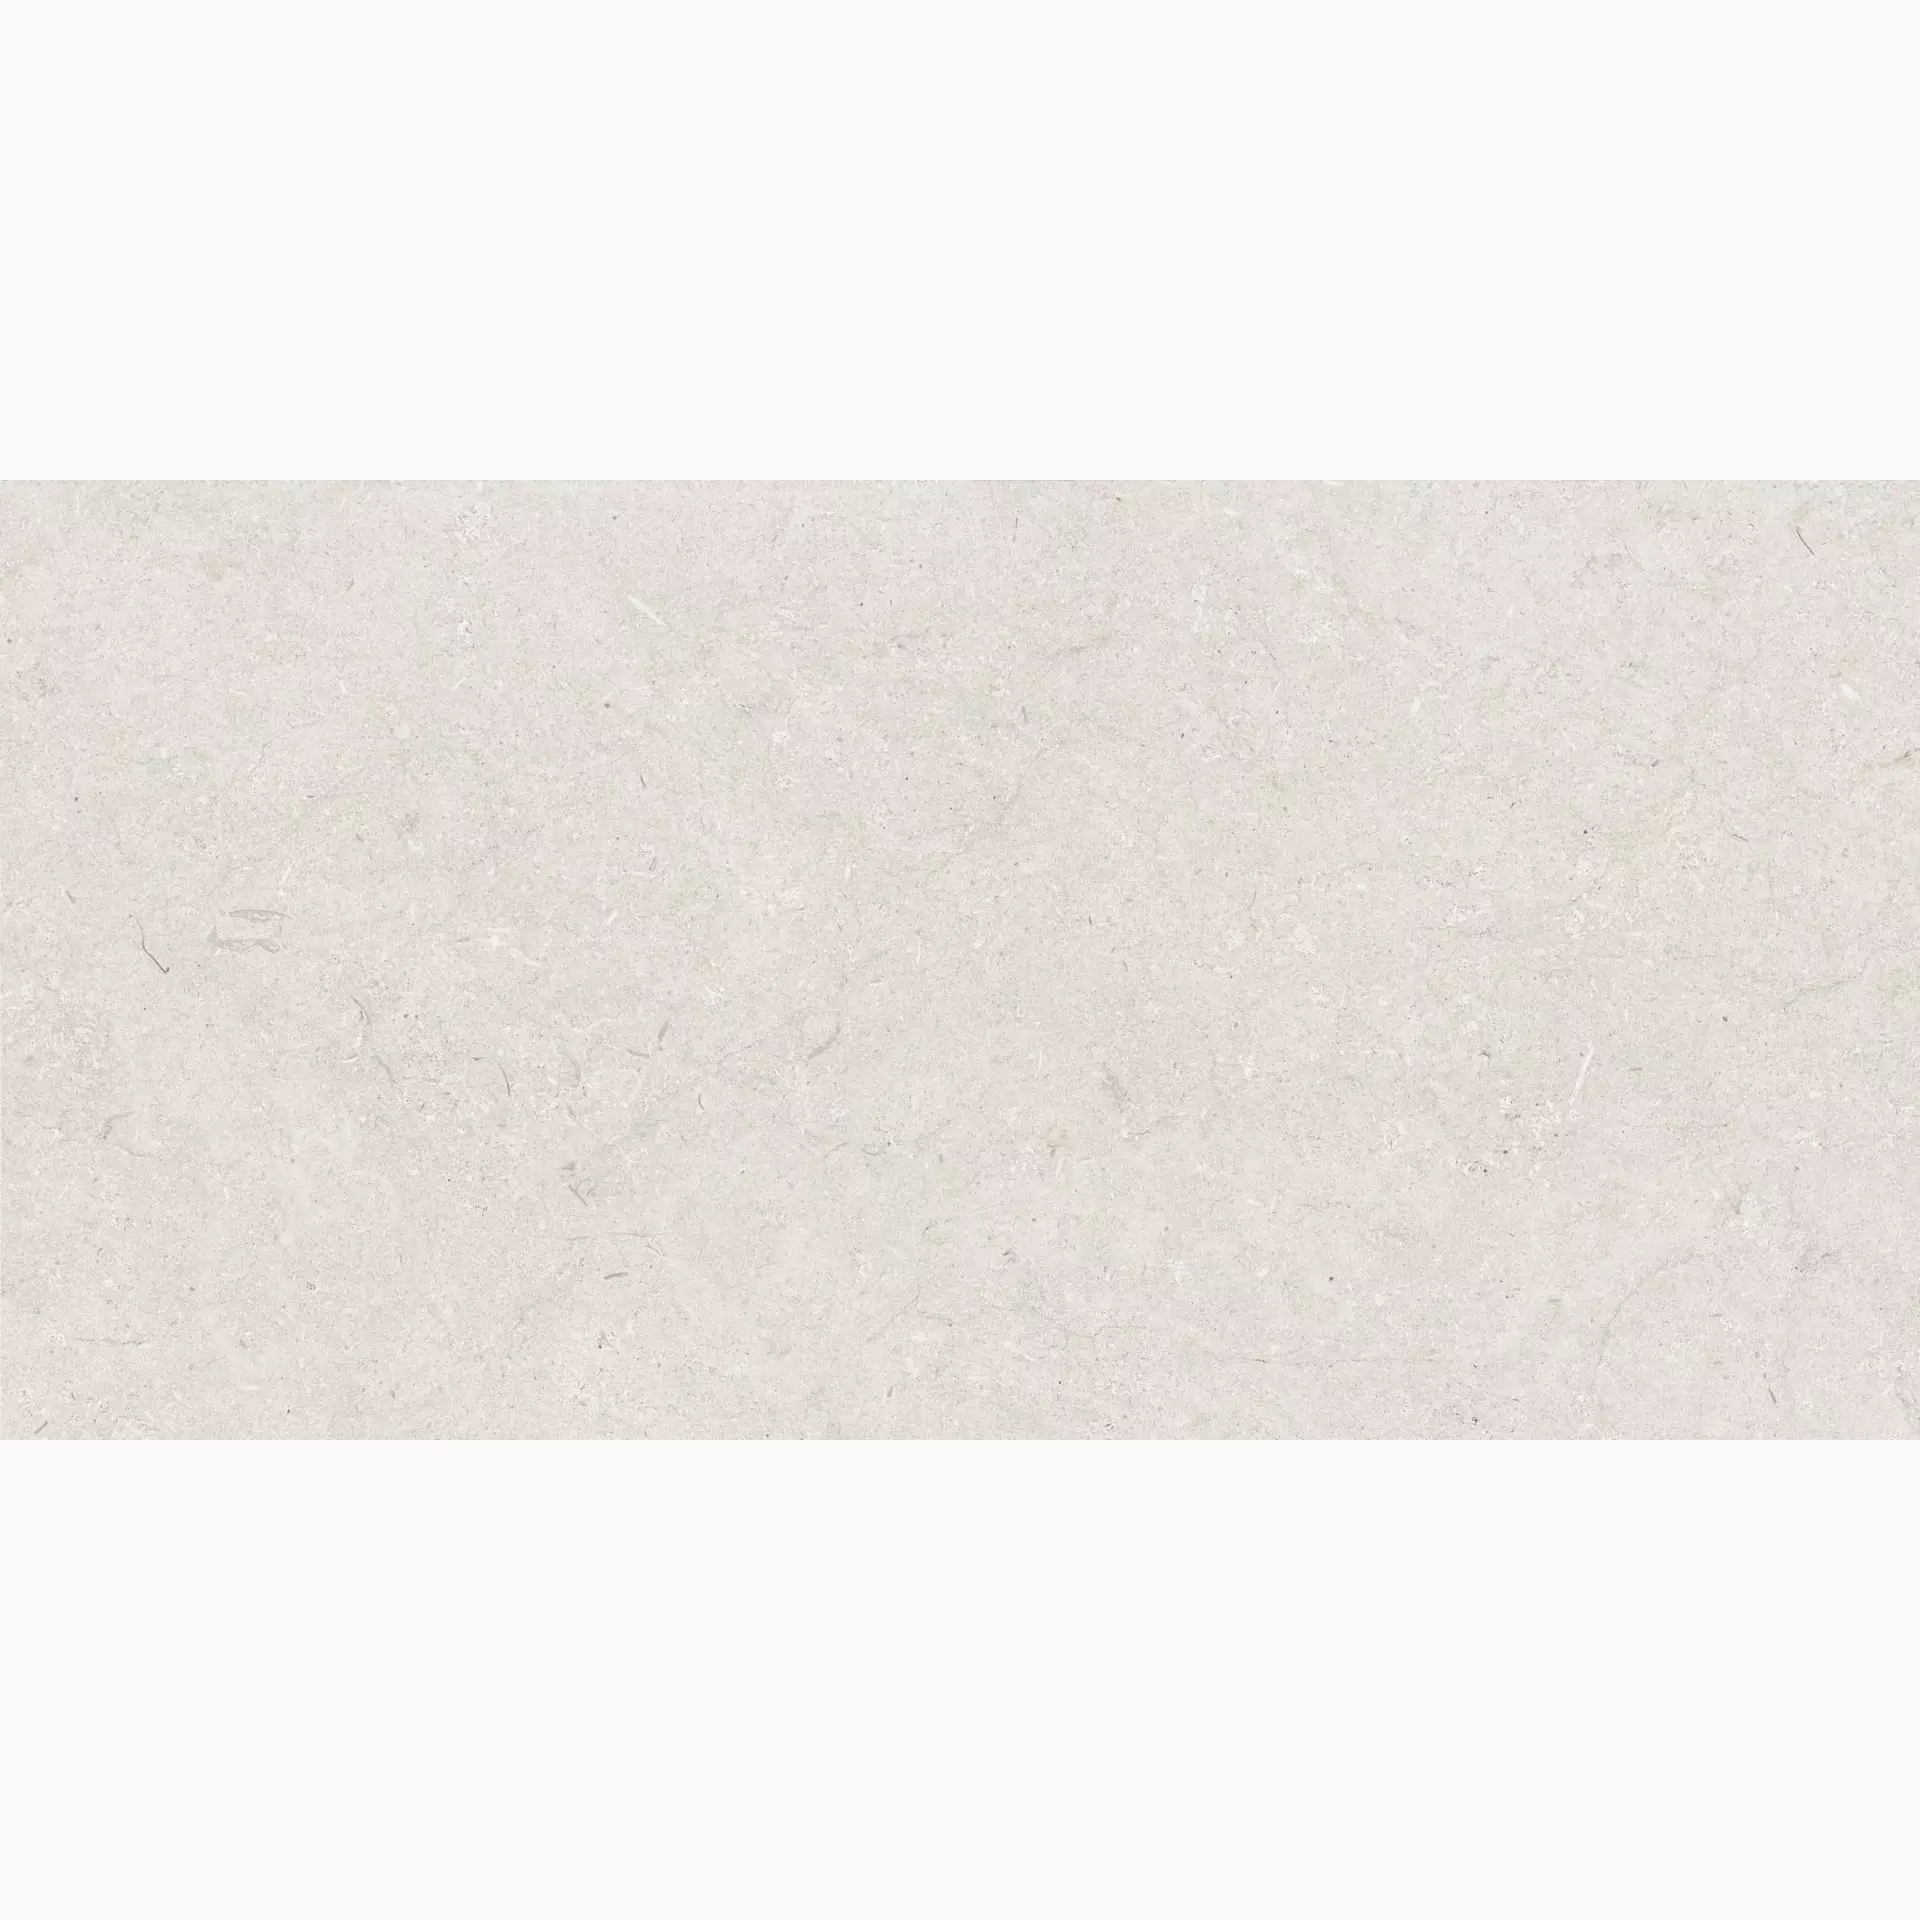 ABK Poetry Stone Trani Ivory Naturale PF60010539 60x120cm rectified 8,5mm